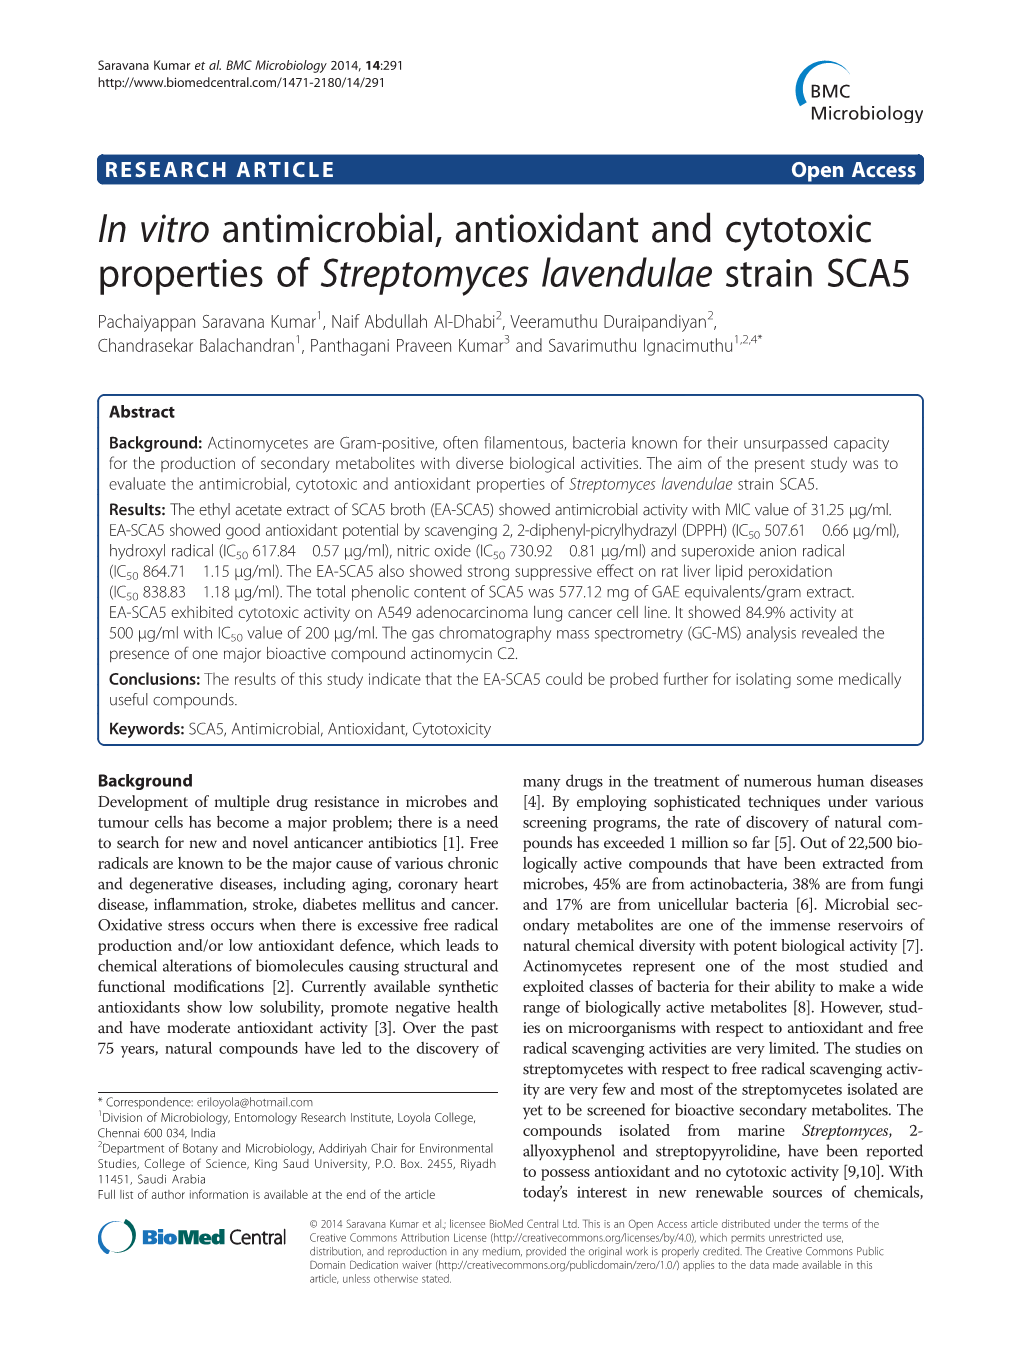 In Vitro Antimicrobial, Antioxidant and Cytotoxic Properties of Streptomyces